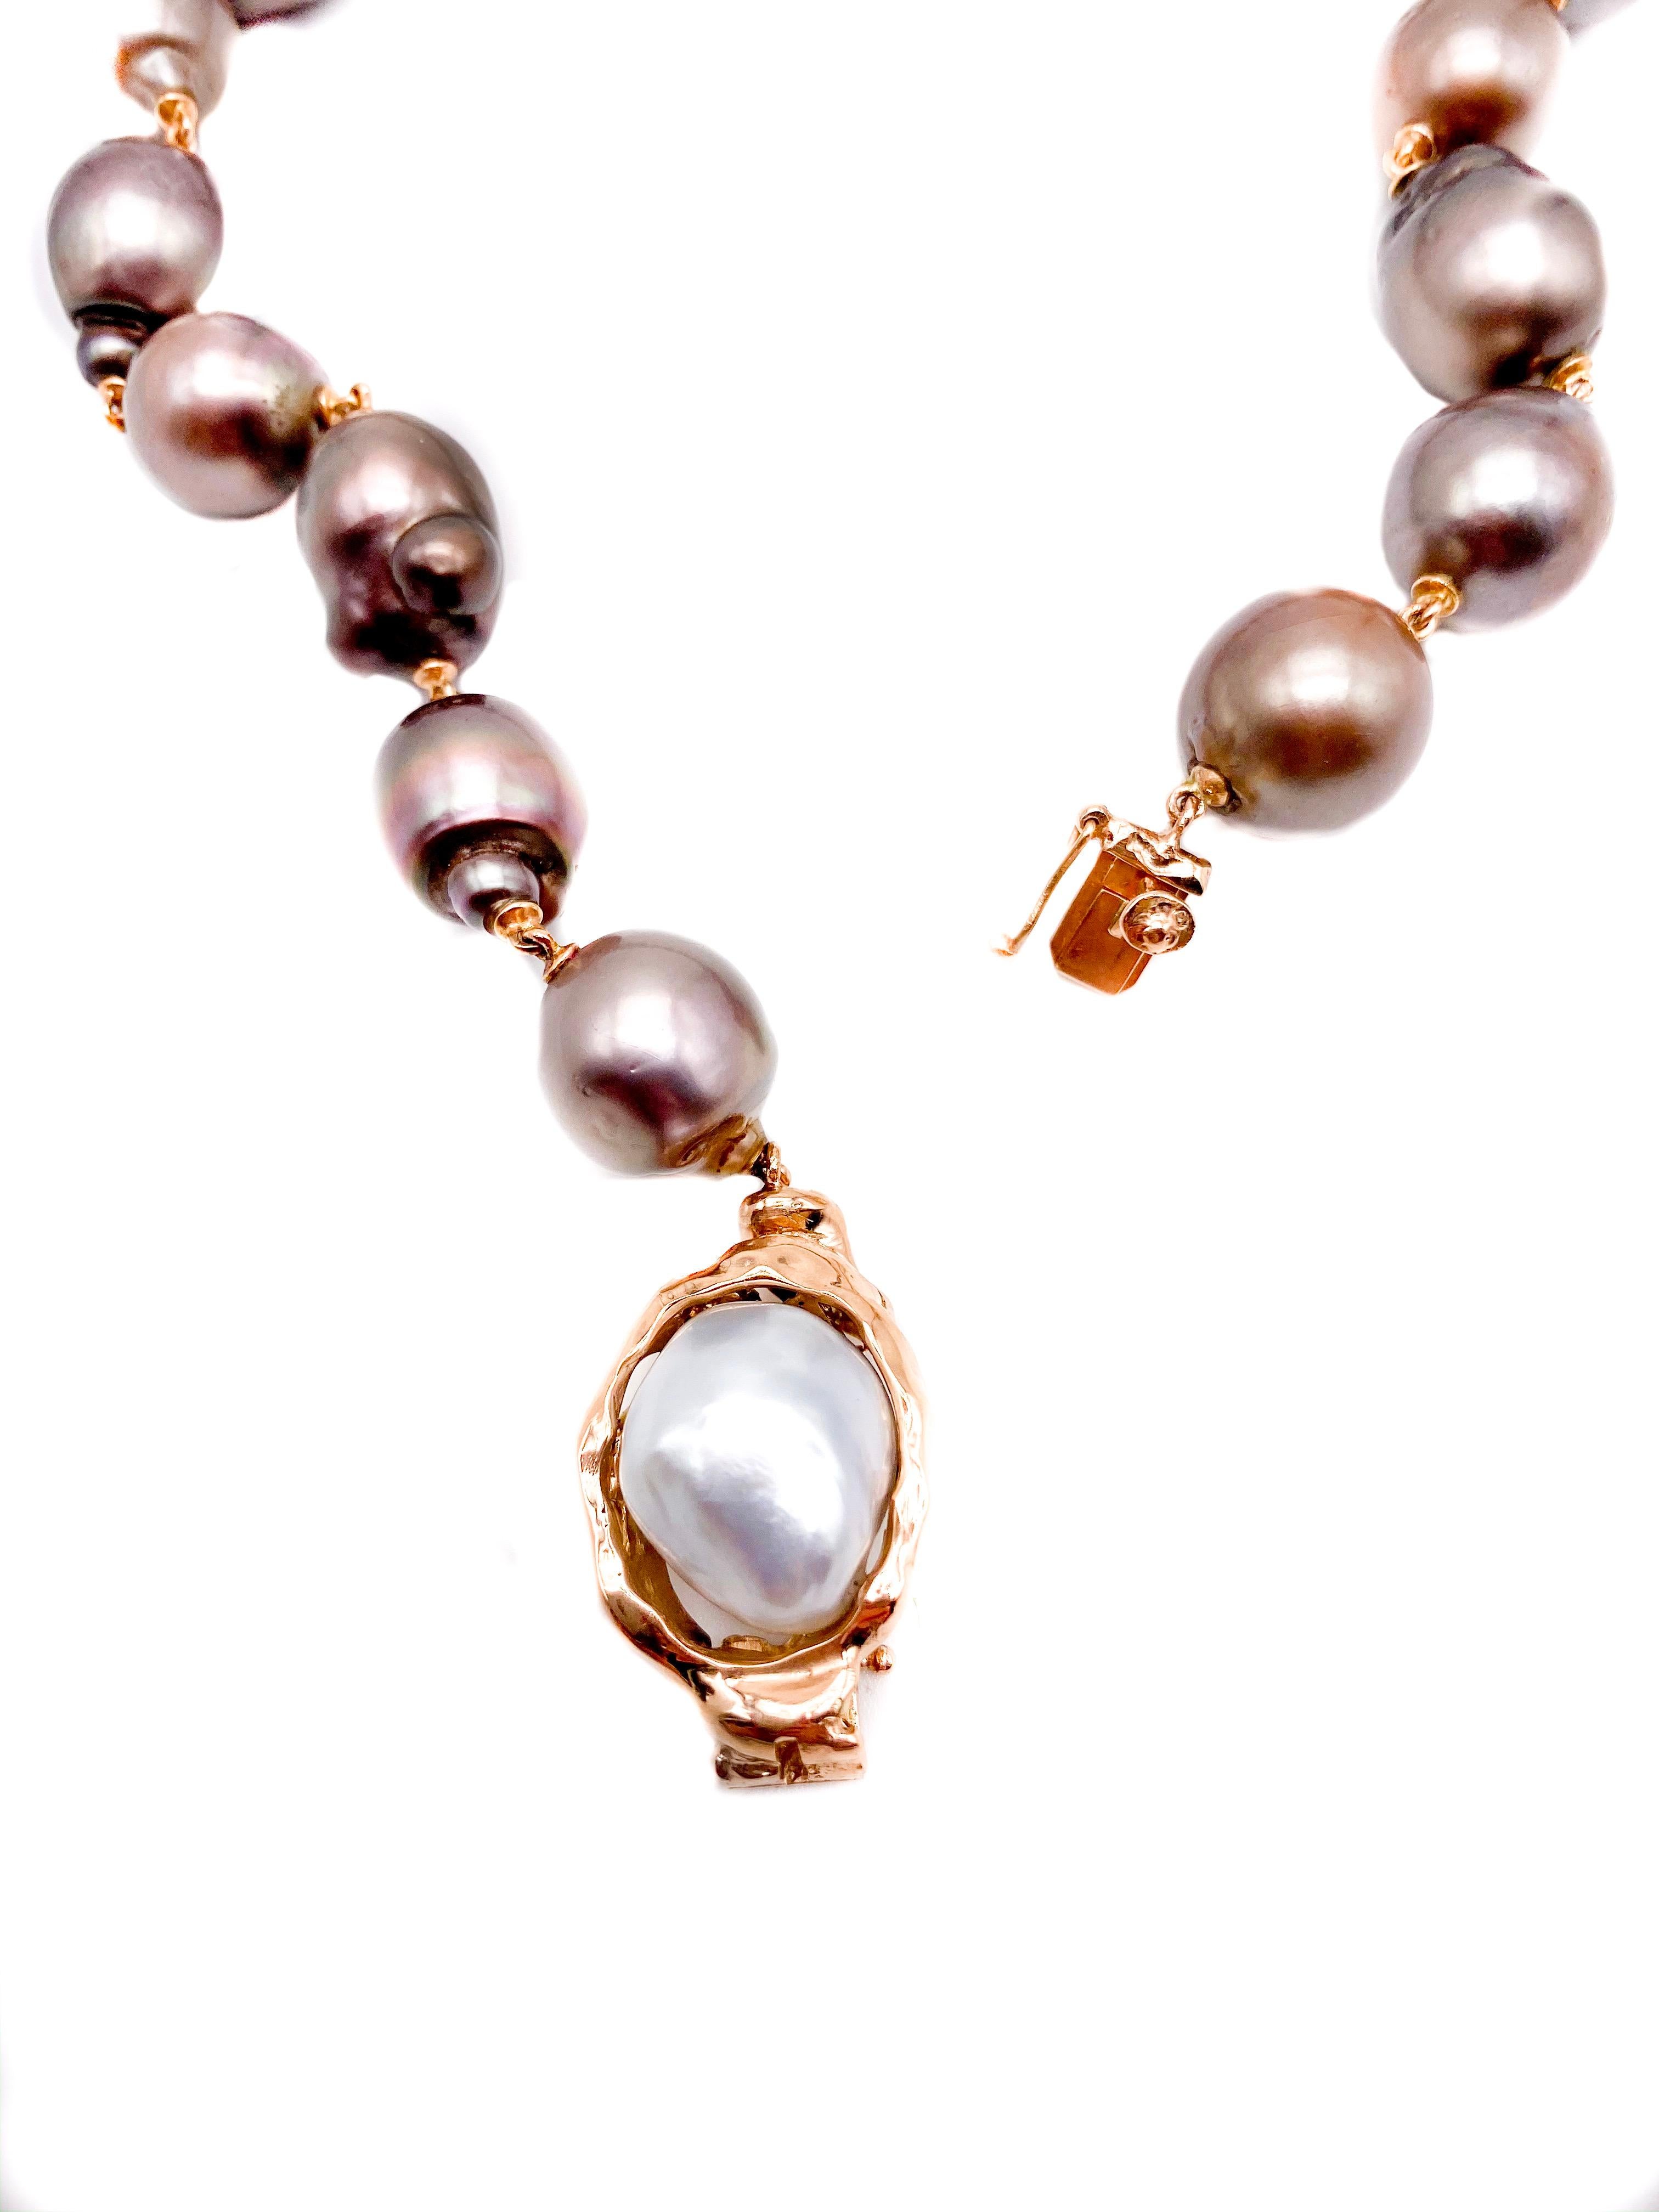 Chocolate Tahitian Pearls Necklace with  18K Gold Clasp with Australian Baroque Pearl . This Necklace Linked With Gold Has A Brown Colour Very Rare To Find In This Size Of Pearls- They Are From 12,5 mm till 17 mm in Baroque Shape. The Lenght of This